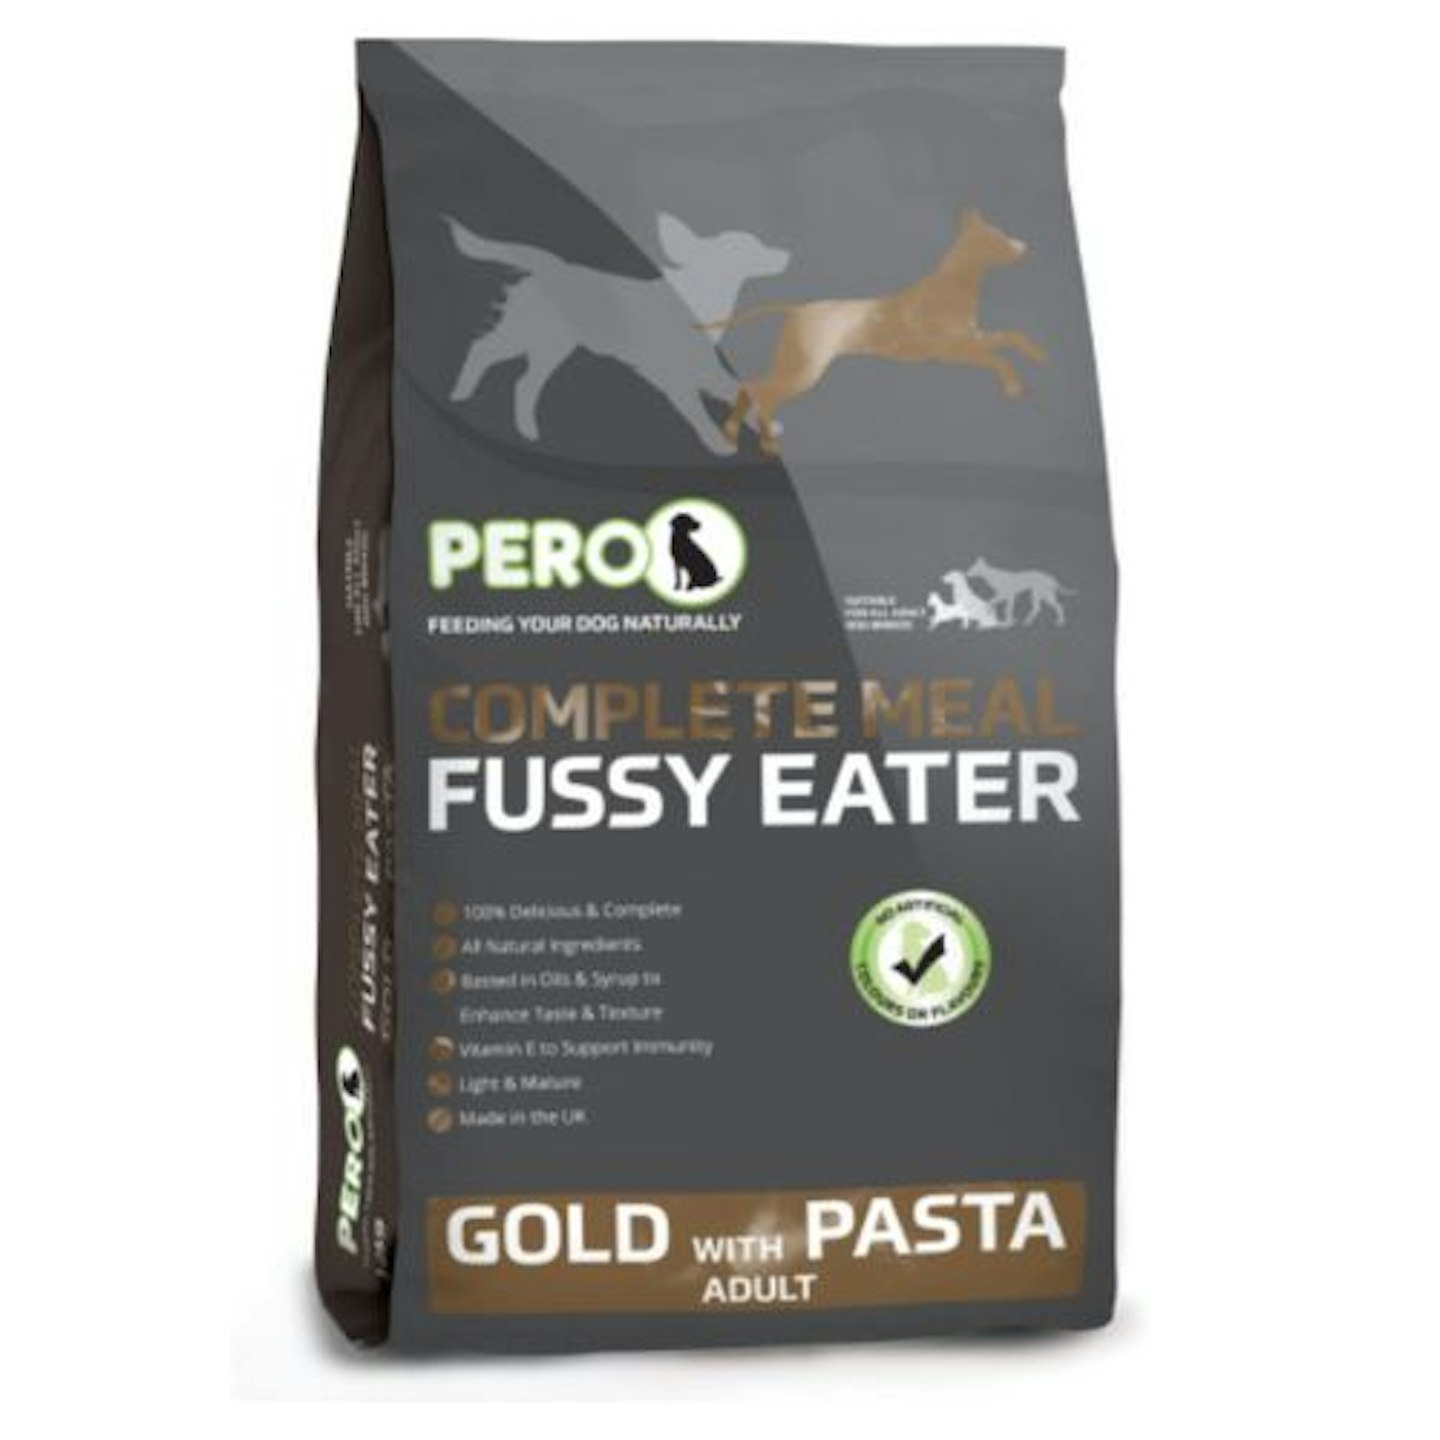 Pero Fussy Eater Gold with Pasta Adult Dog Food